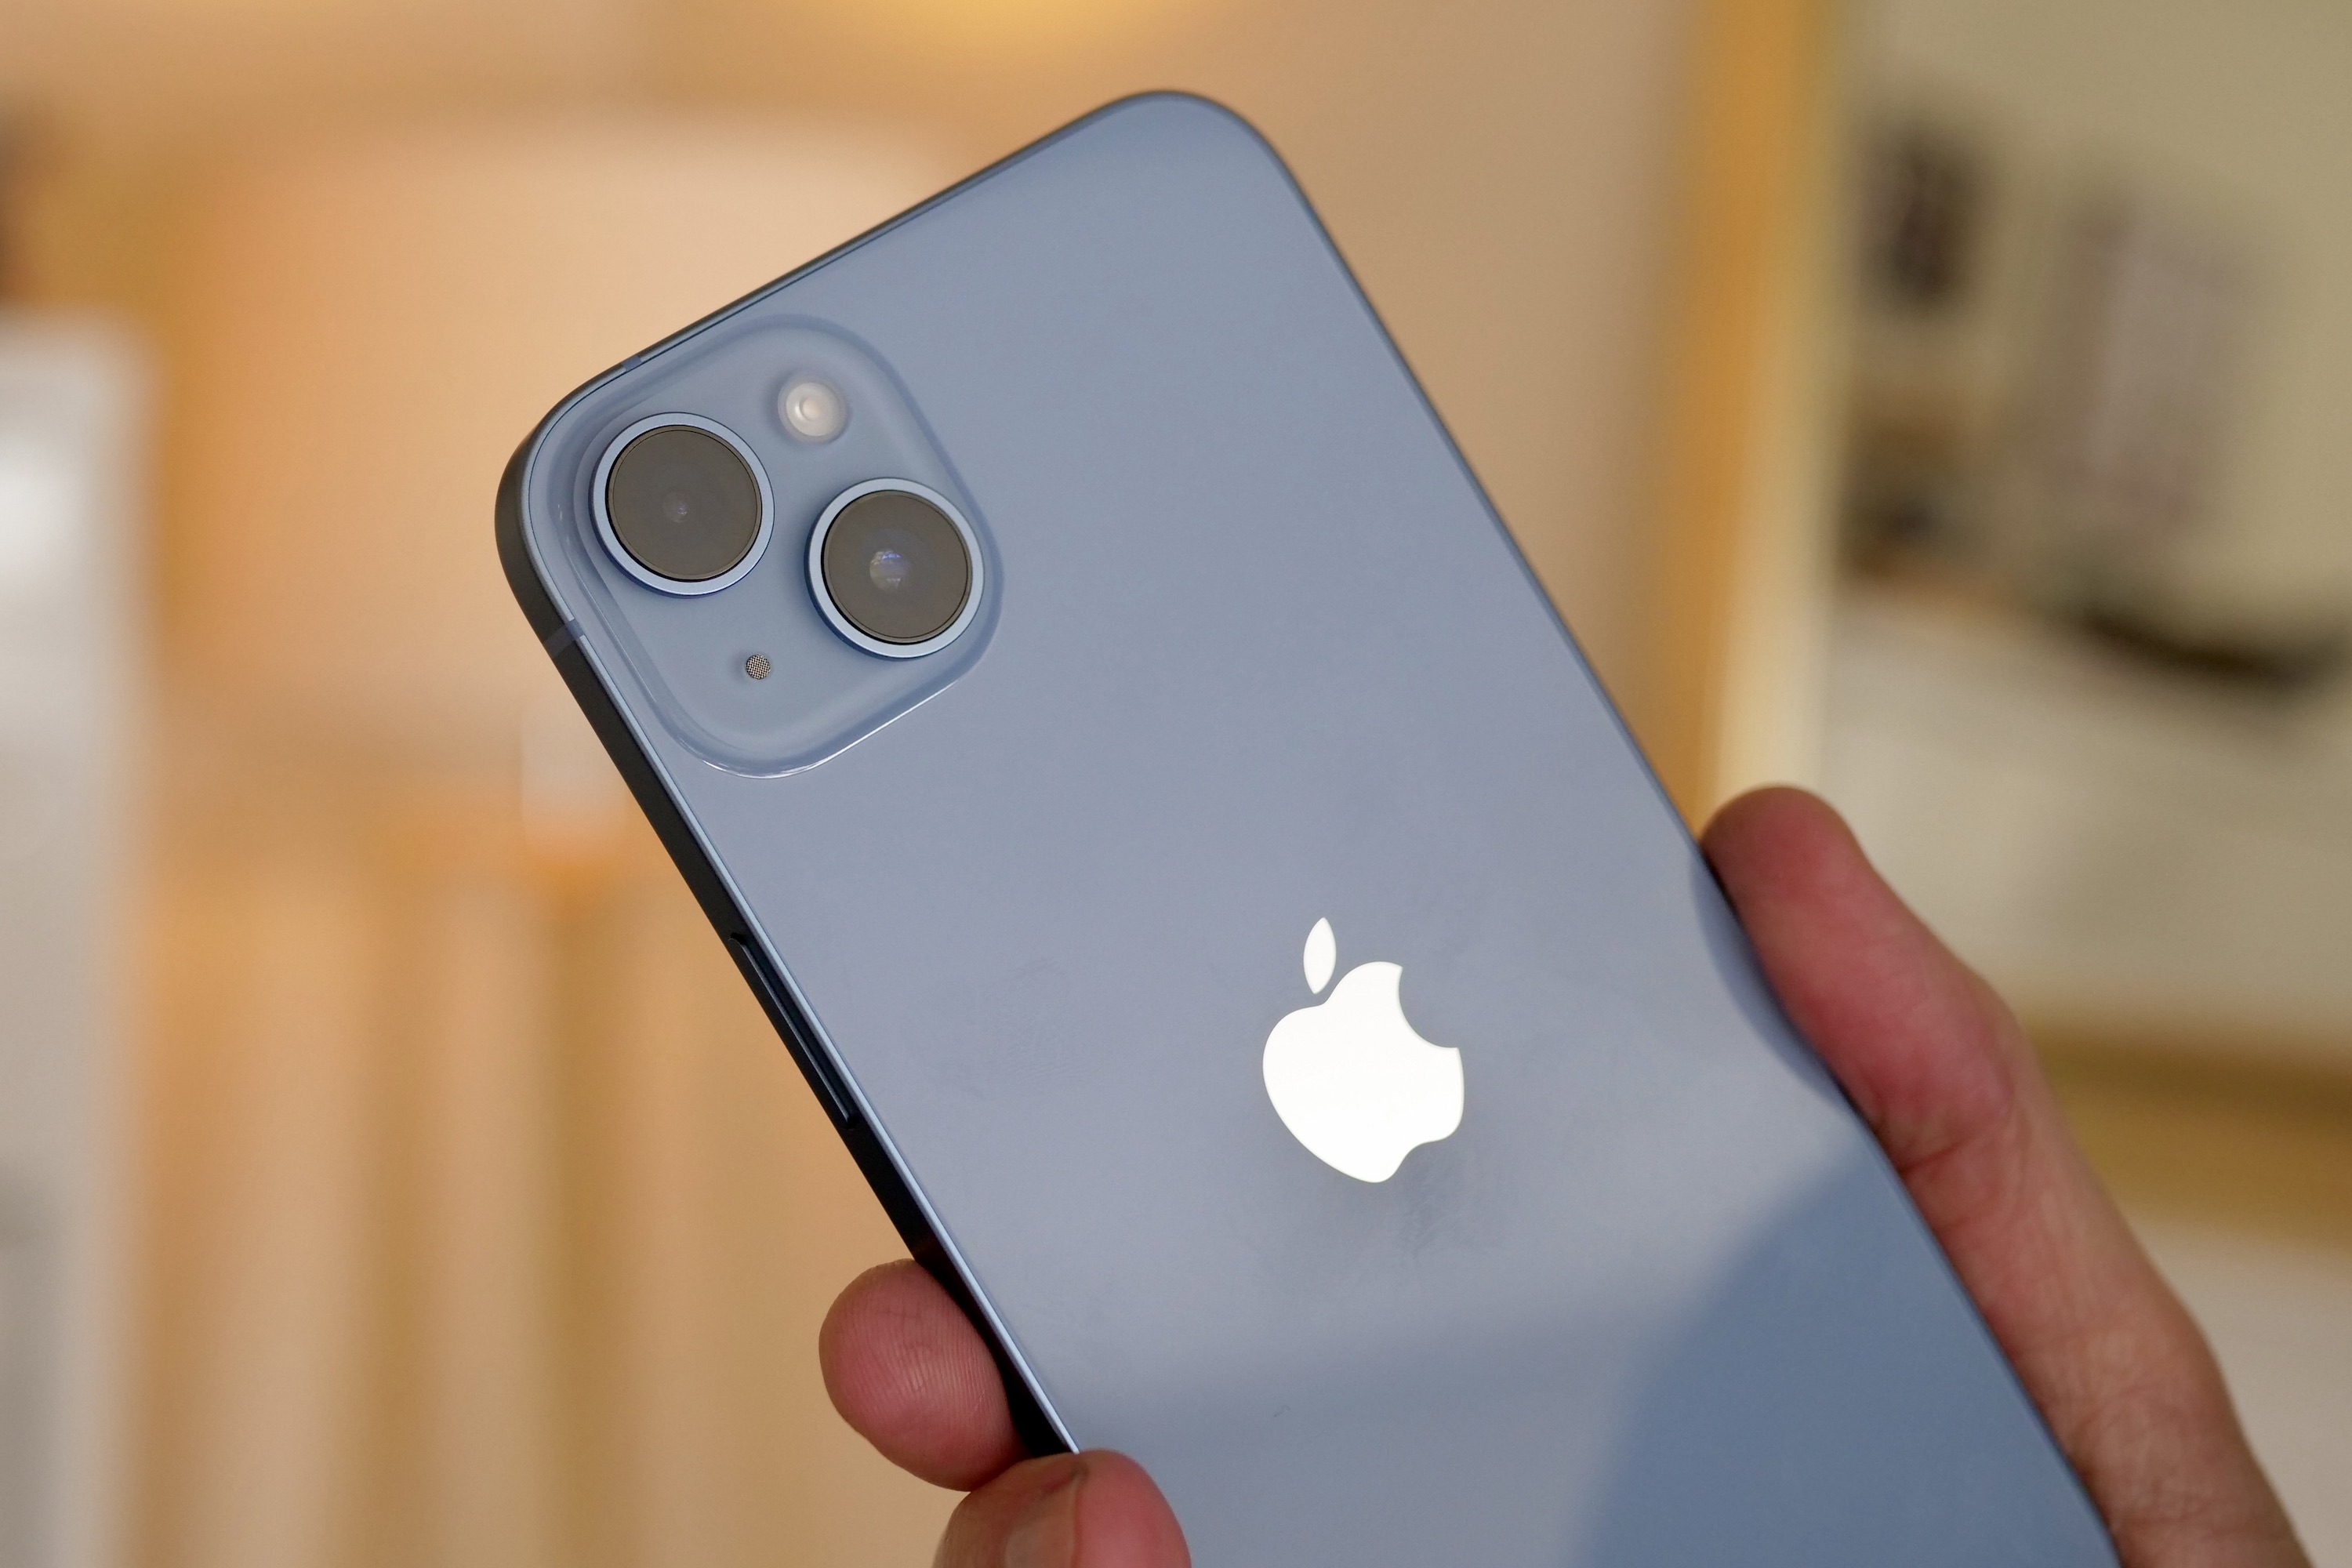 IPhone 14 Plus Review - Overshadowed Excellence –